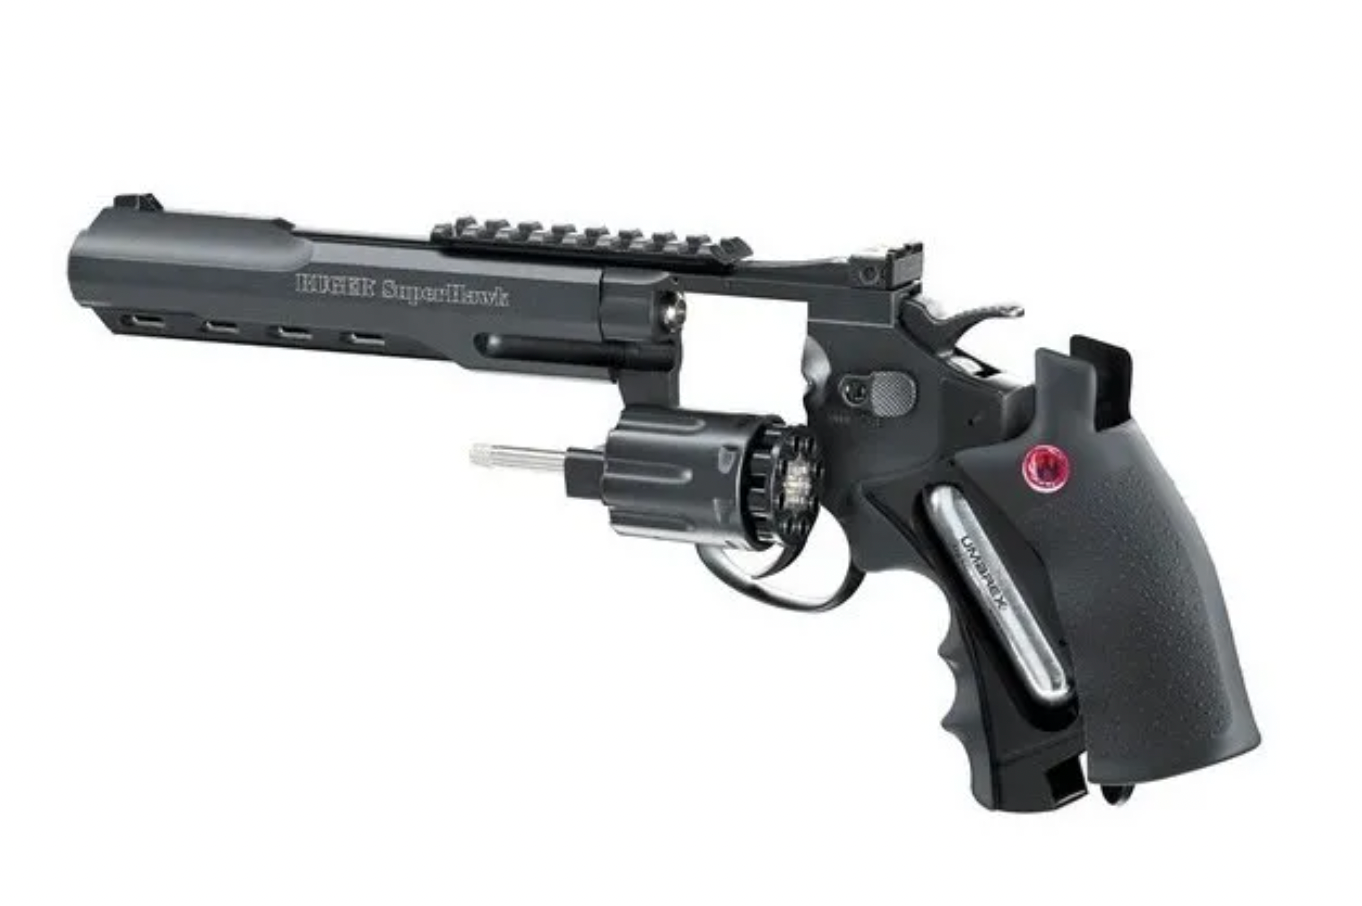 Revolver Ruger Superhawk / Airsoft / Co2 - hiking outdoor Chile